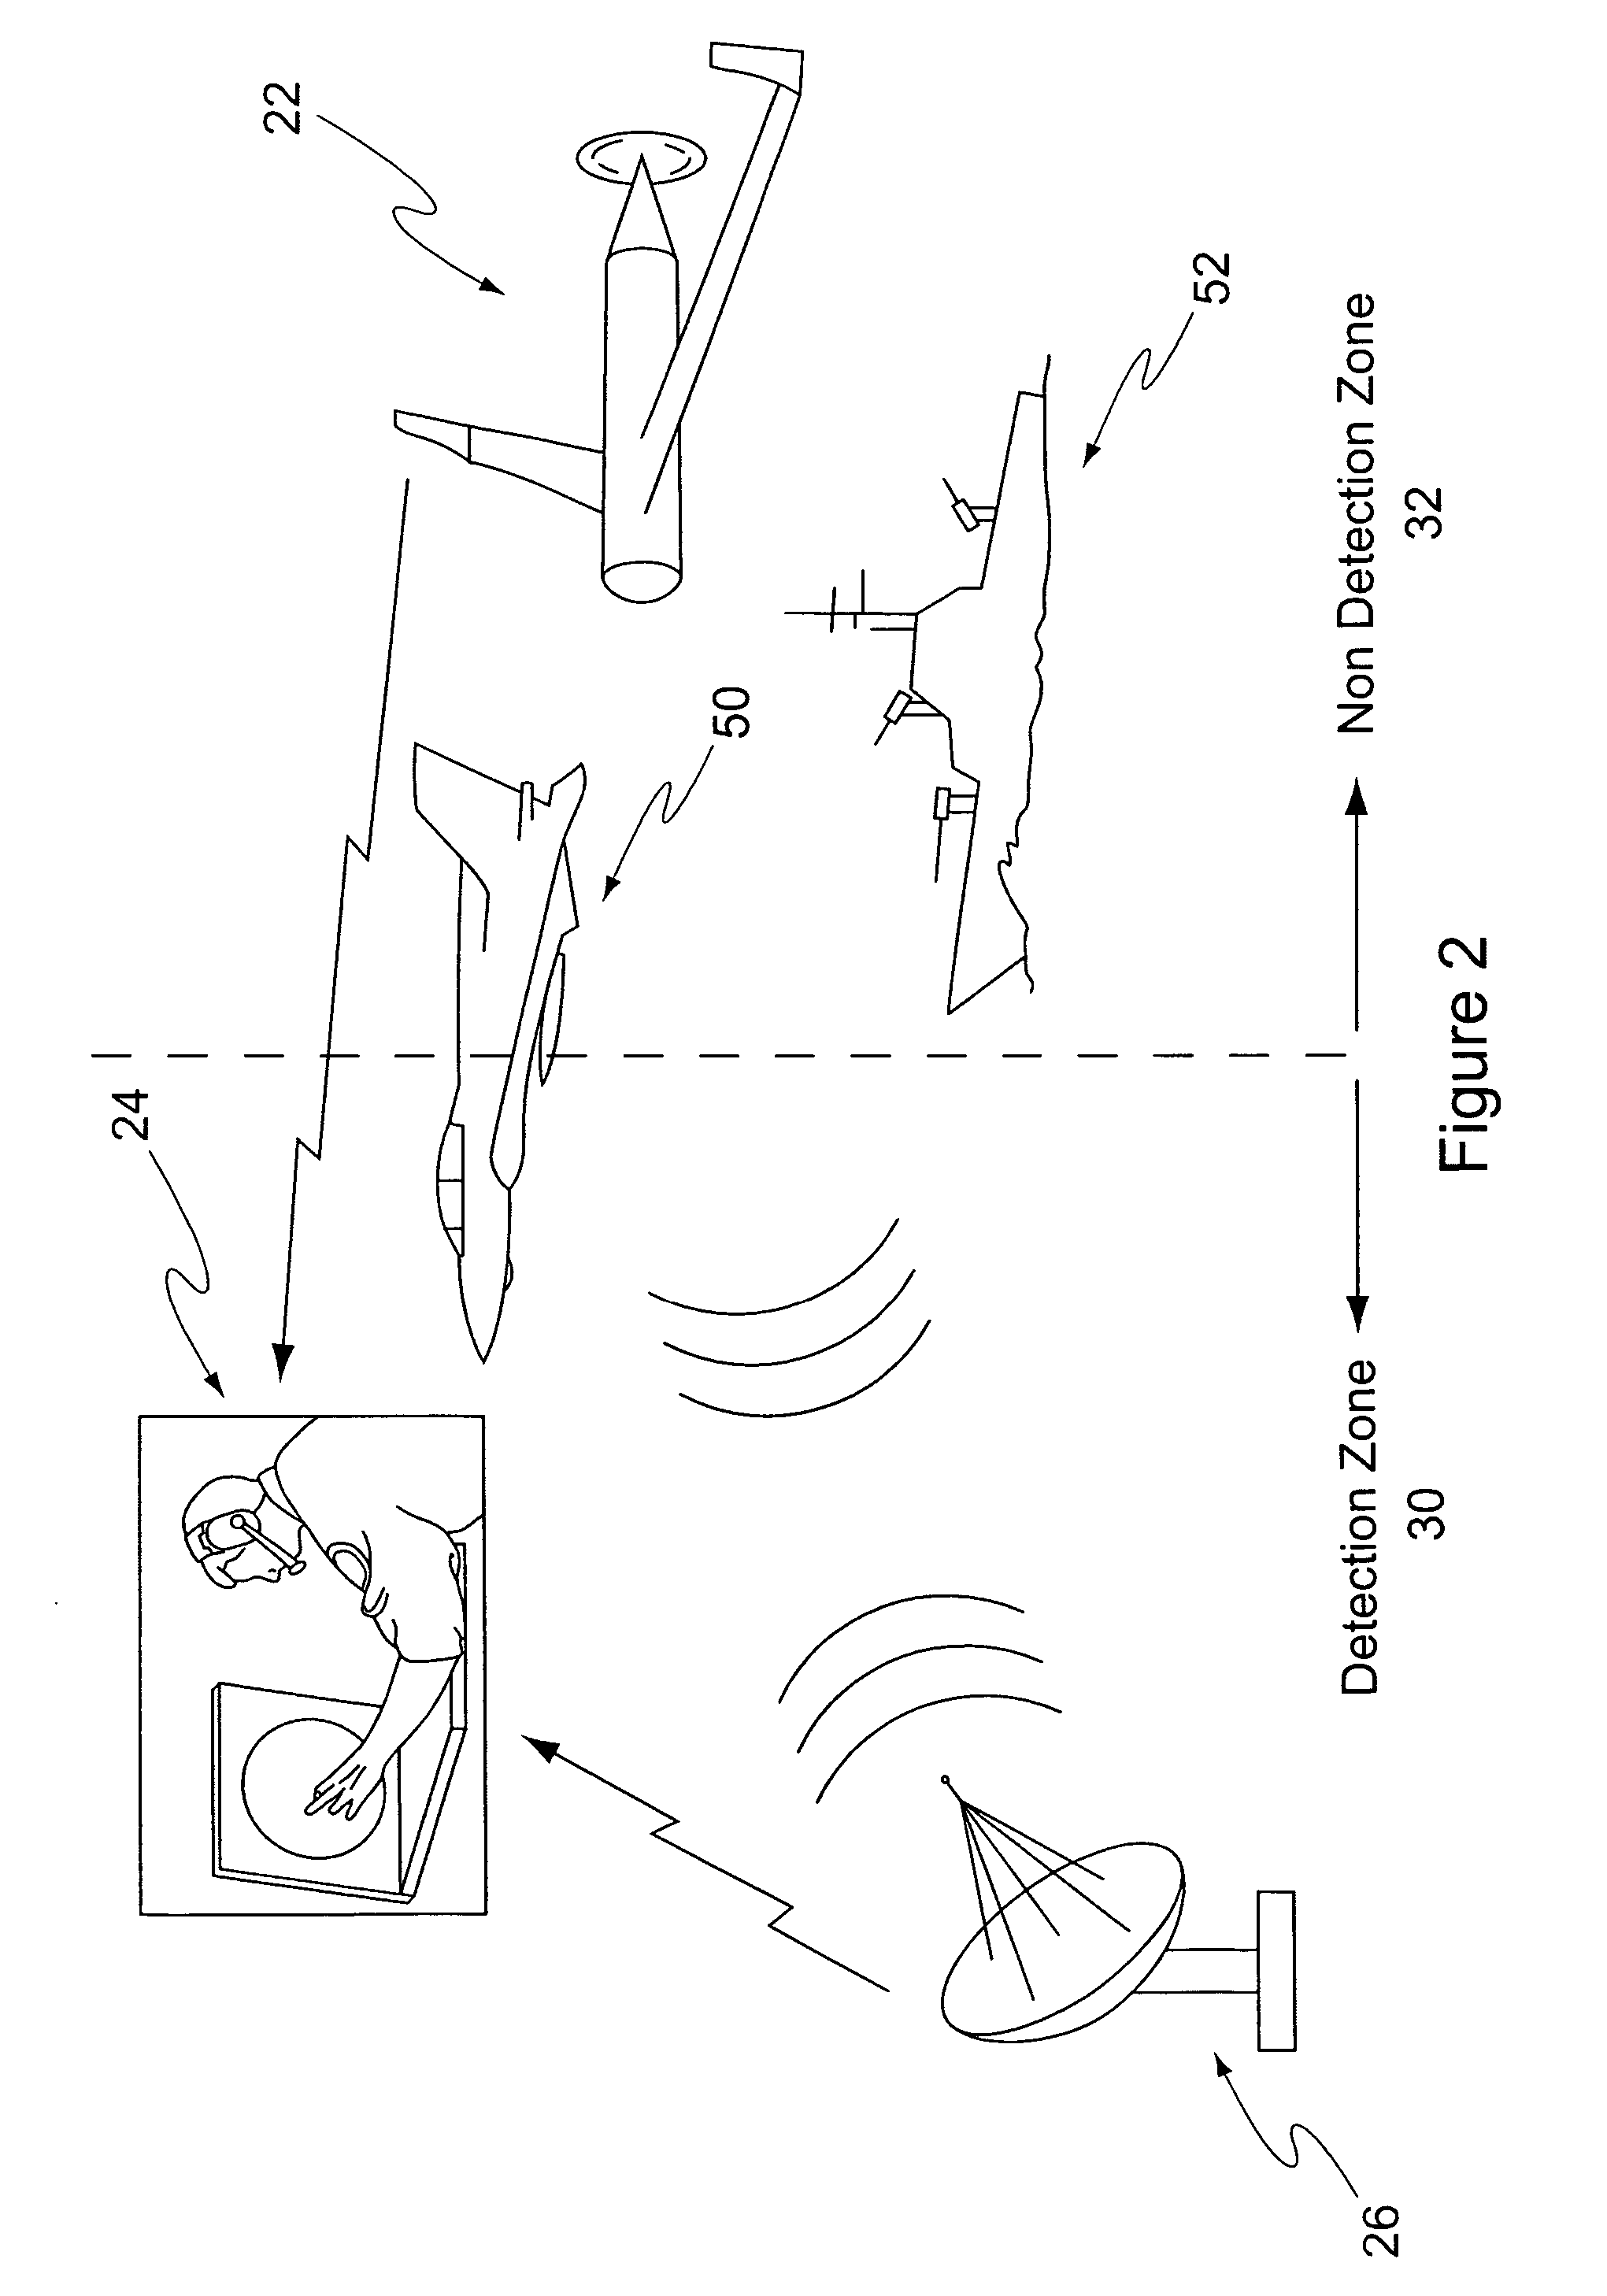 System and method for radar detection and calibration